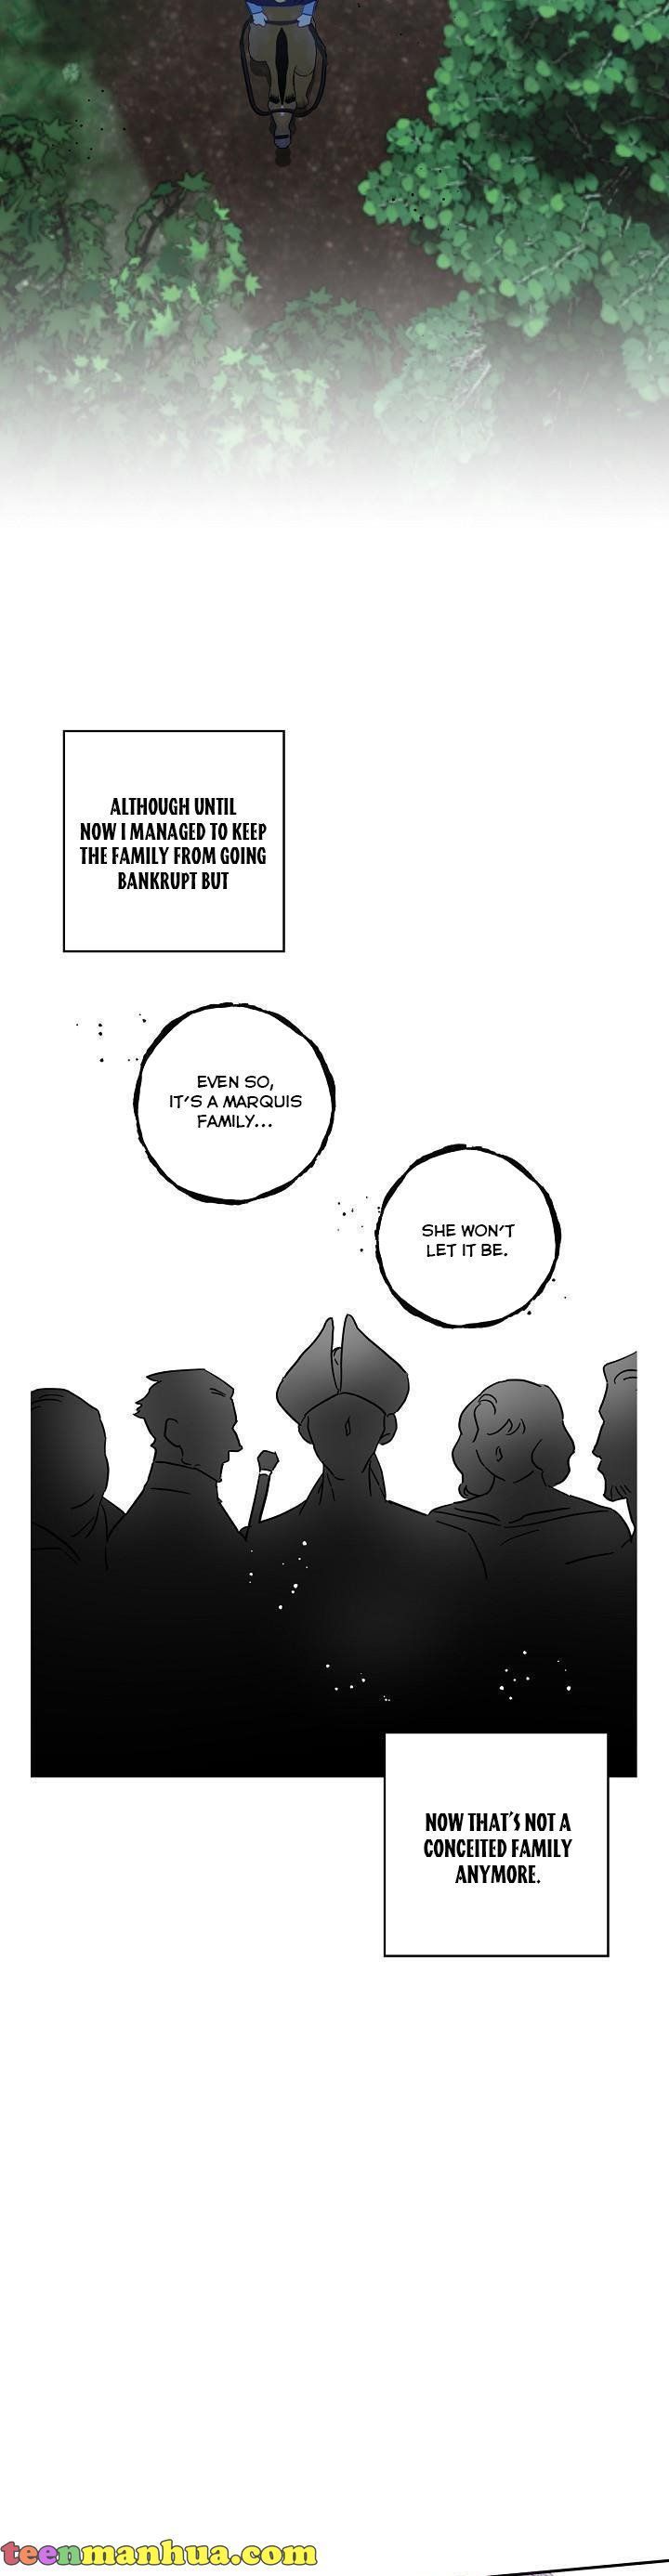 I am Afraid I have Failed to Divorce Chapter 45 page 7